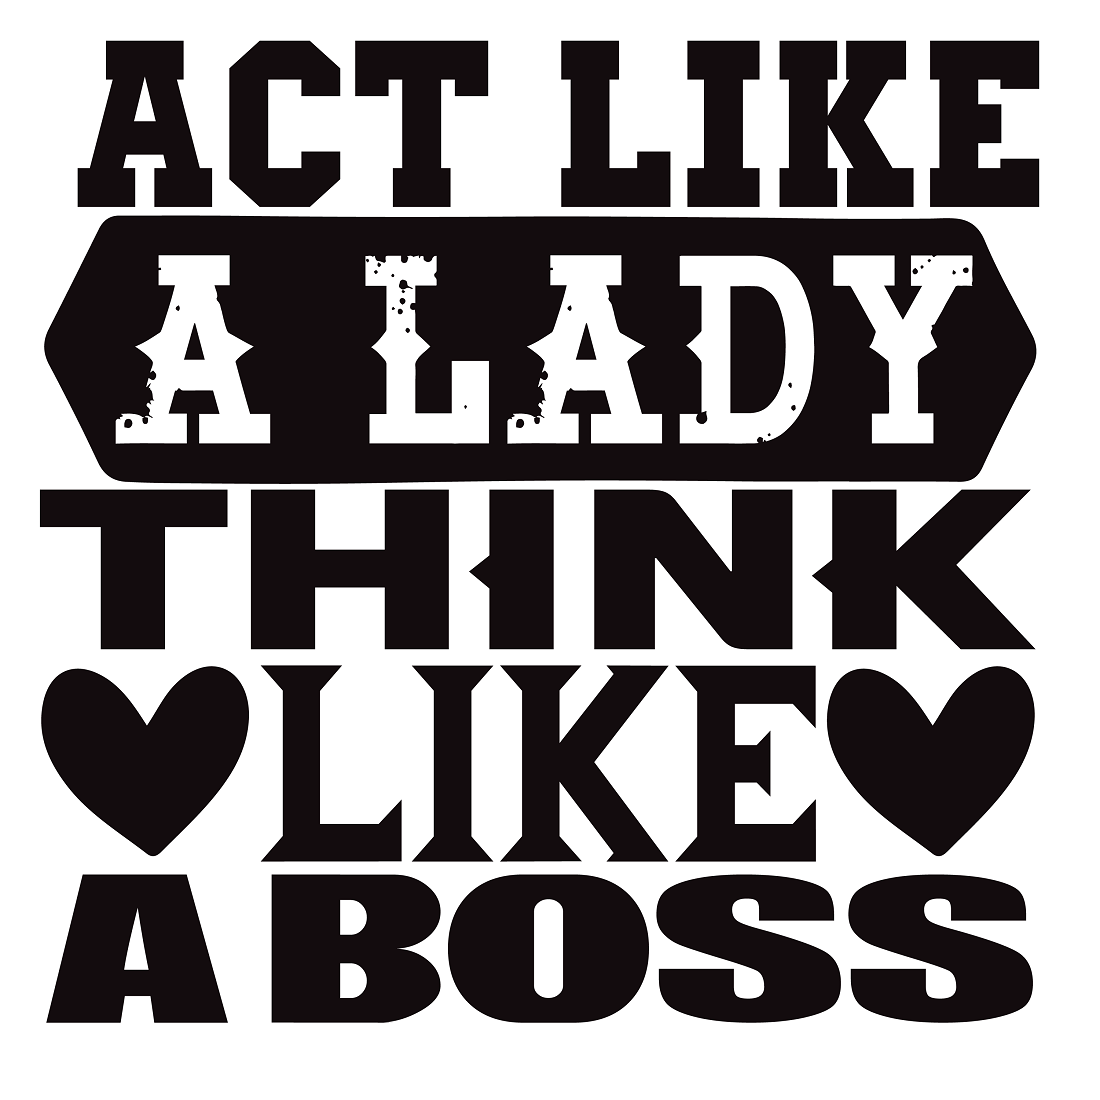 Act like a lady think like a boss preview image.